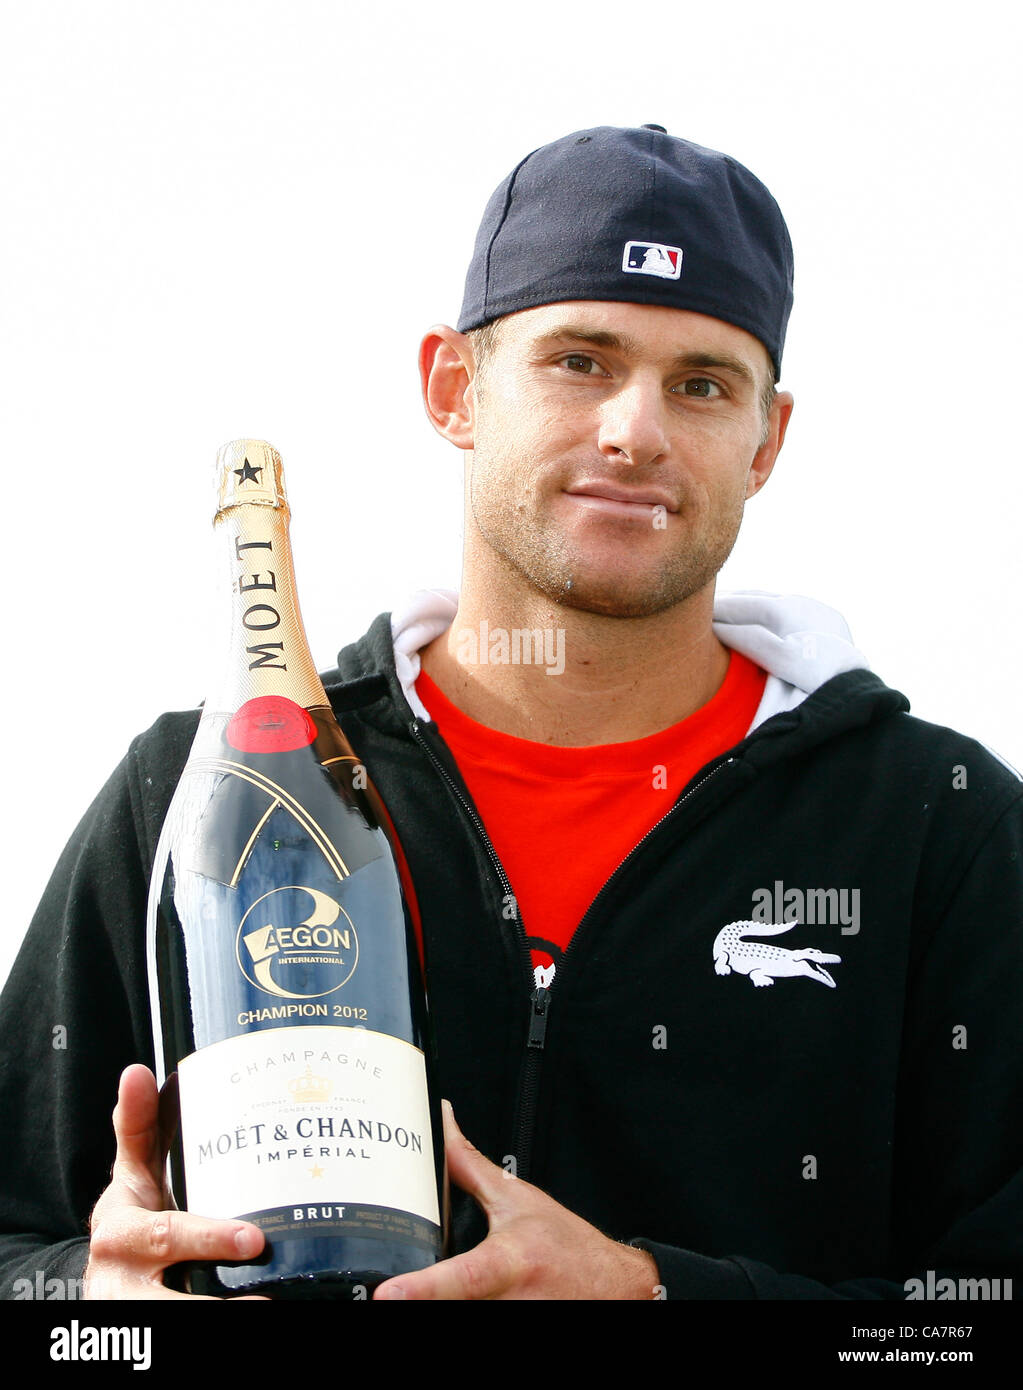 23.06.12 Devonshire Park, Eastbourne, ENGLAND: Andy Roddick (USA) with his ATP Tour title trophy at the AEGON INTERNATIONAL tournament in Eastbourne June 23 2012 Stock Photo